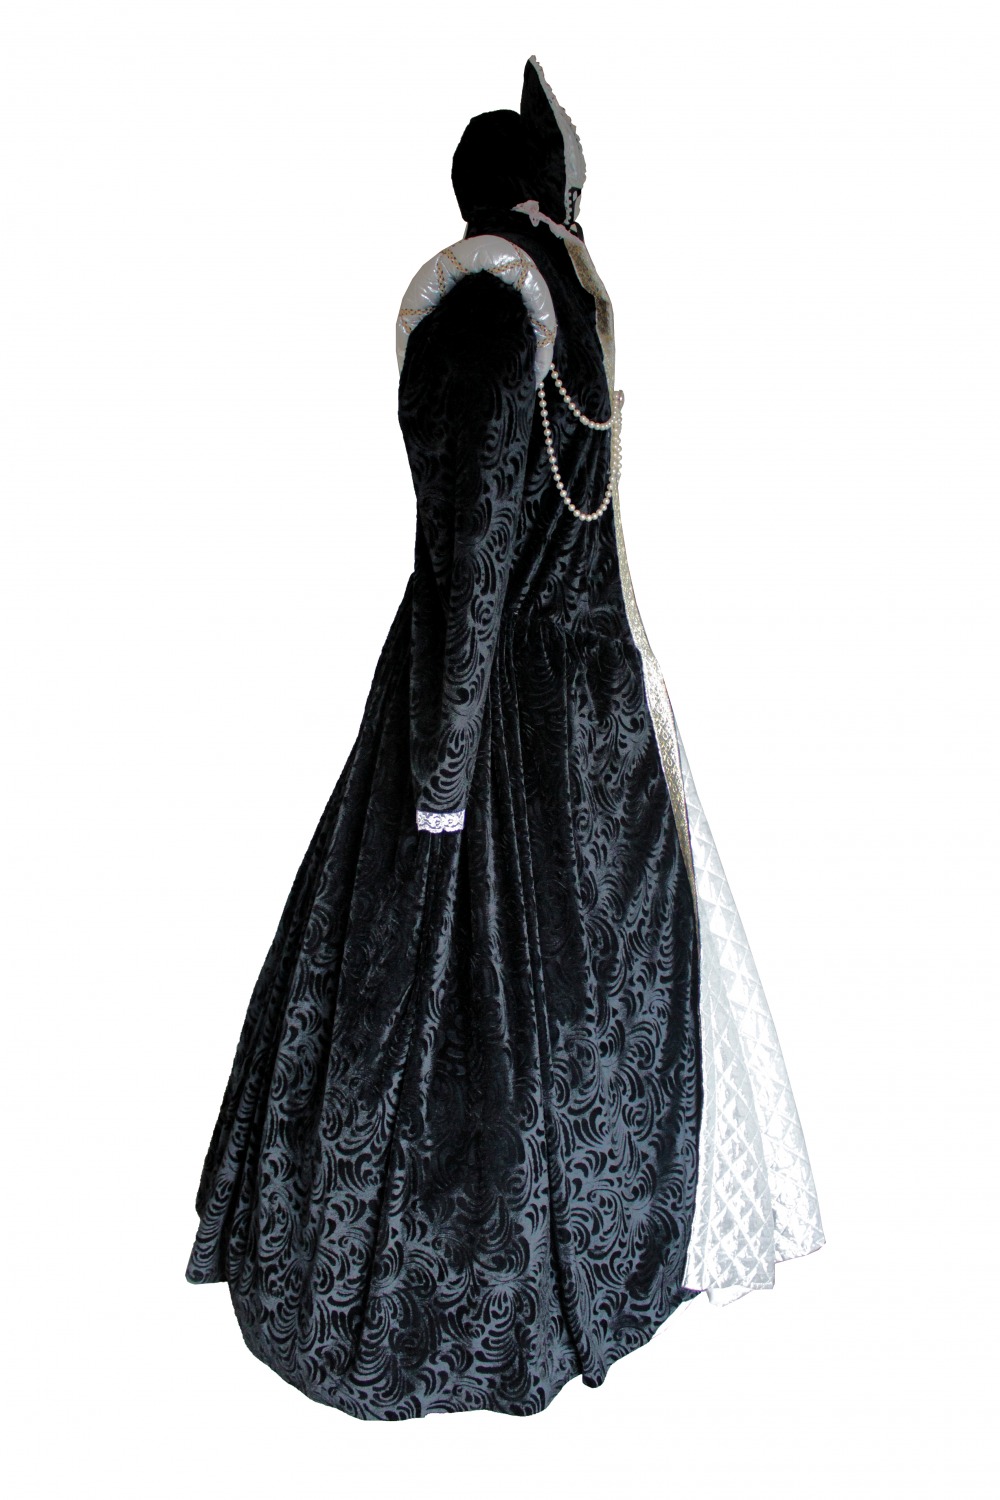 Ladies Tudor Elizabethan Mary Queen Of Scots Theatrical Period Costume Size 14 - 16 Image